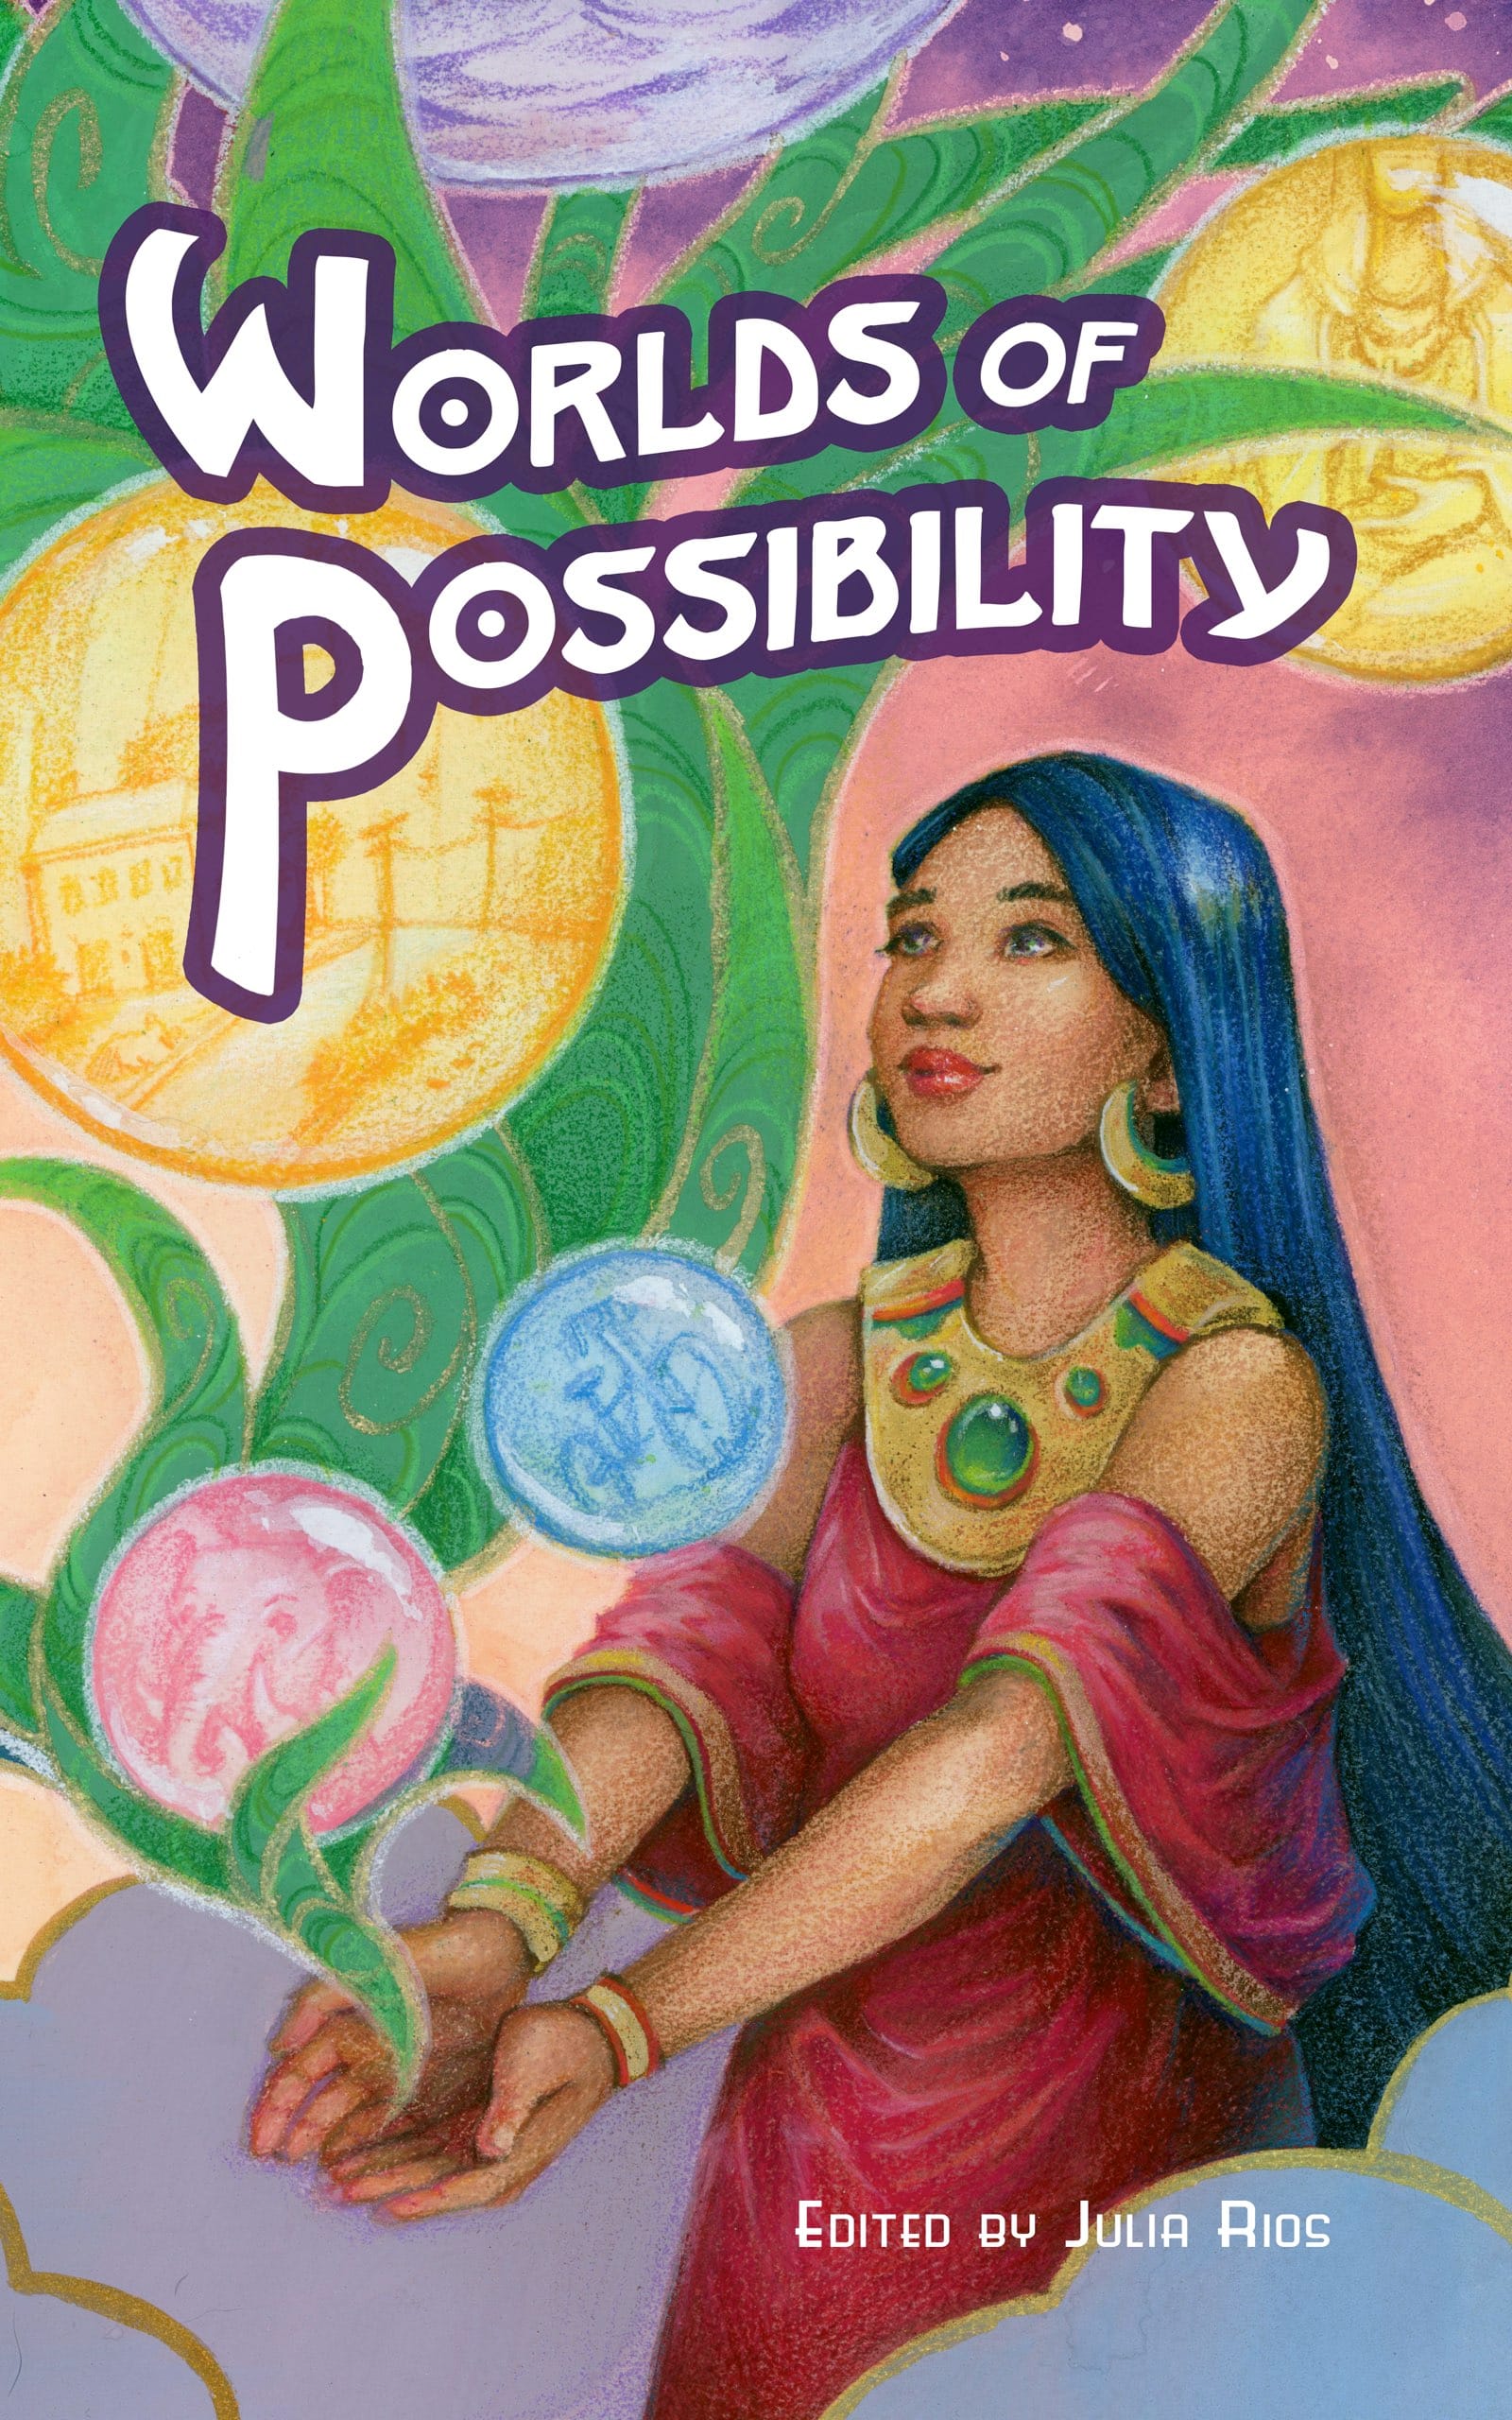 Cover for the Worlds of Possibility anthology featuring art by Grace P. Fong